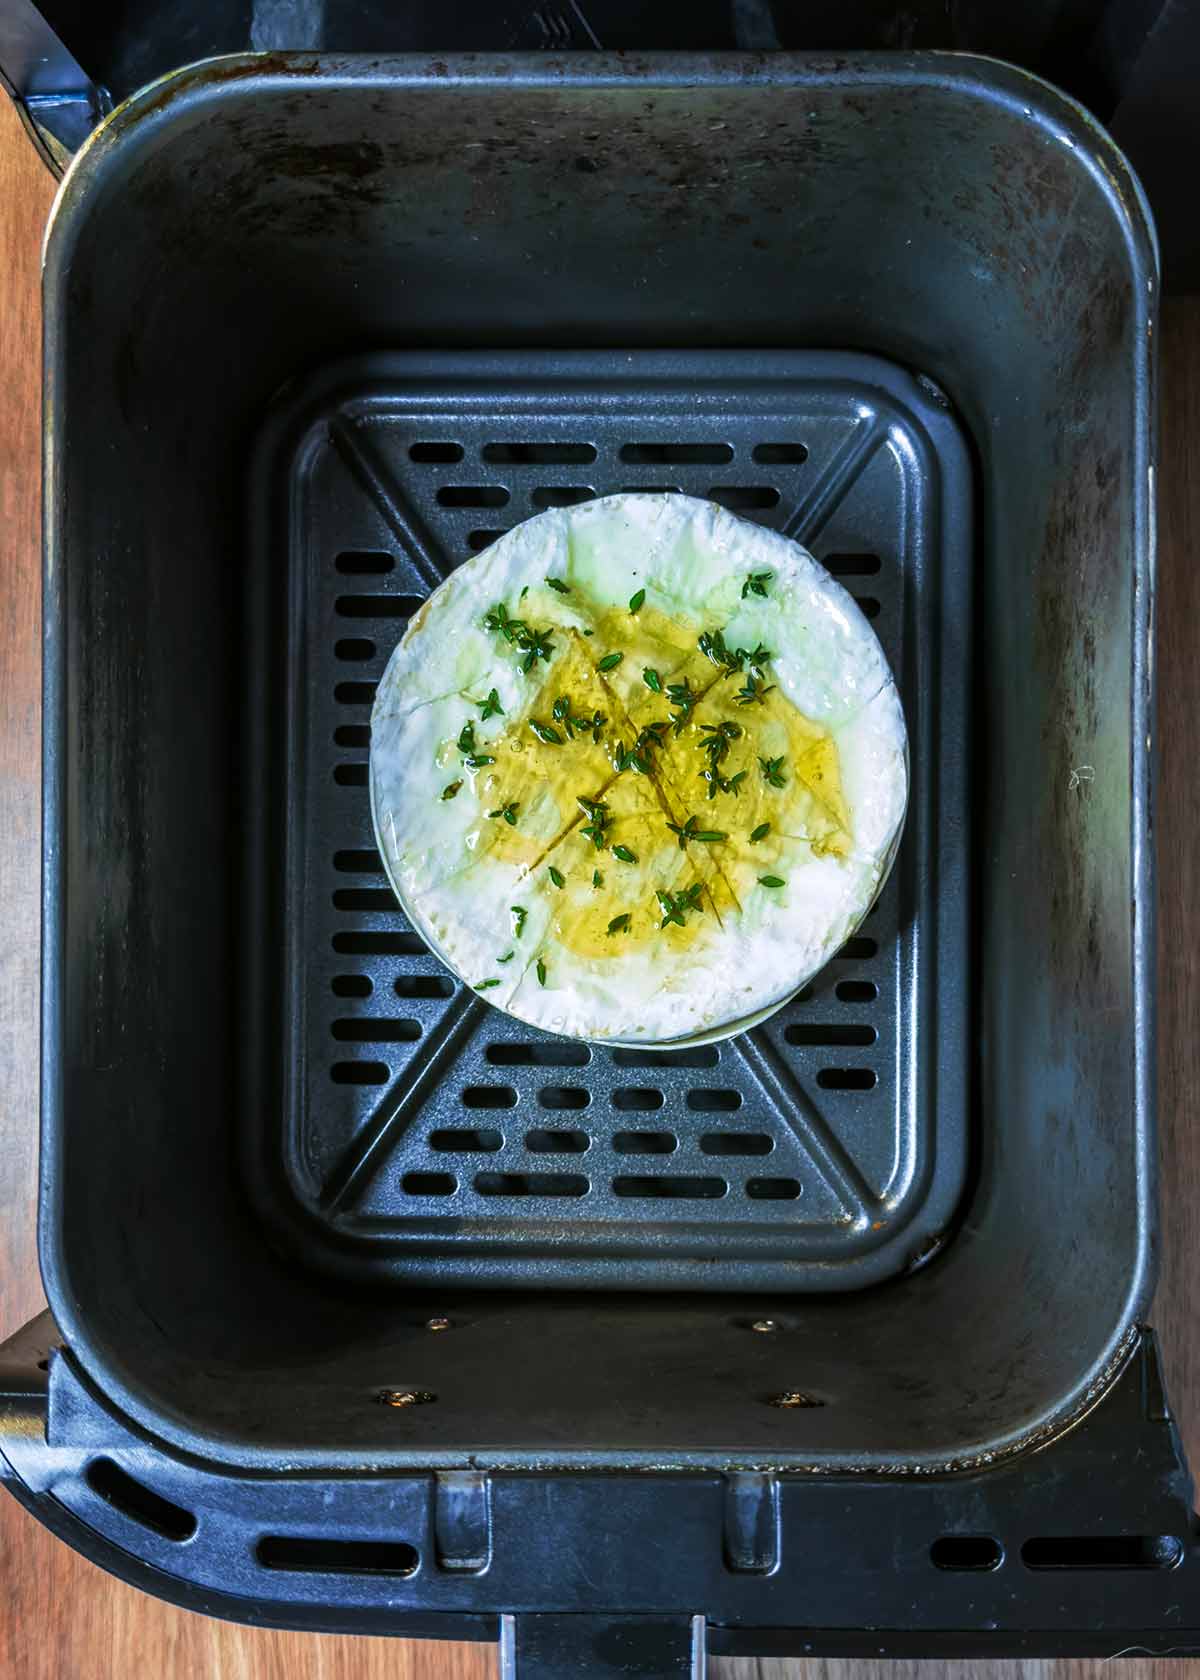 The uncooked Camembert in an air fryer basket.